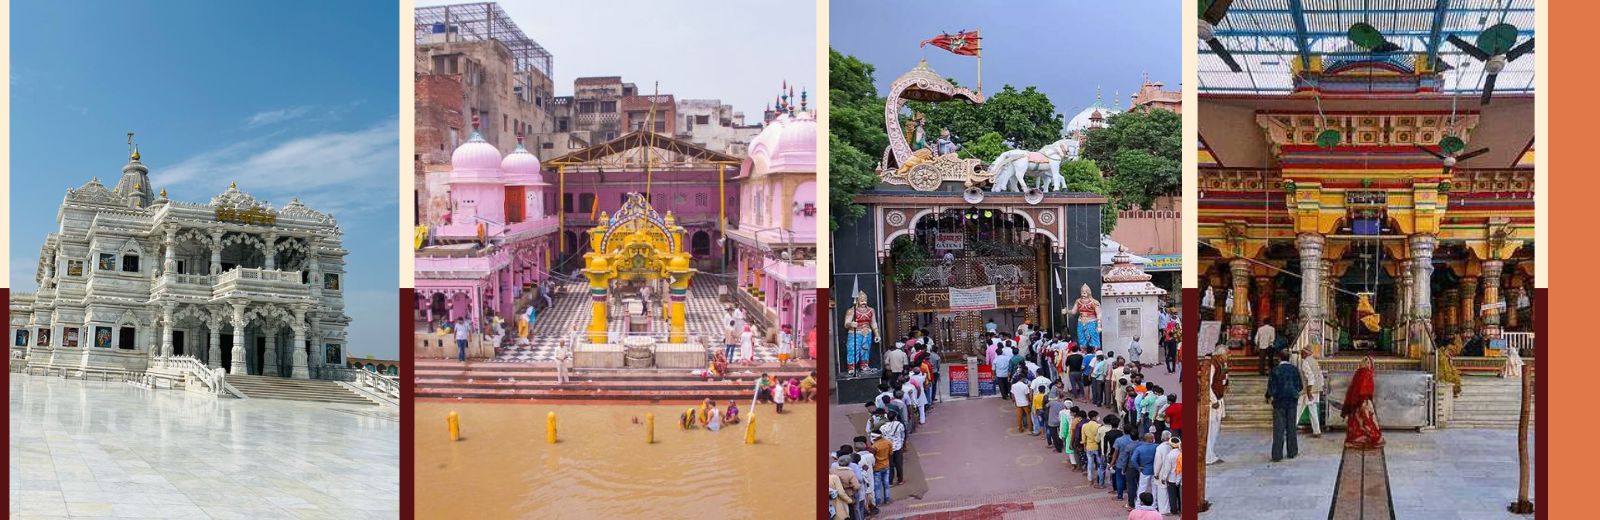 Famous Temples of Mathura